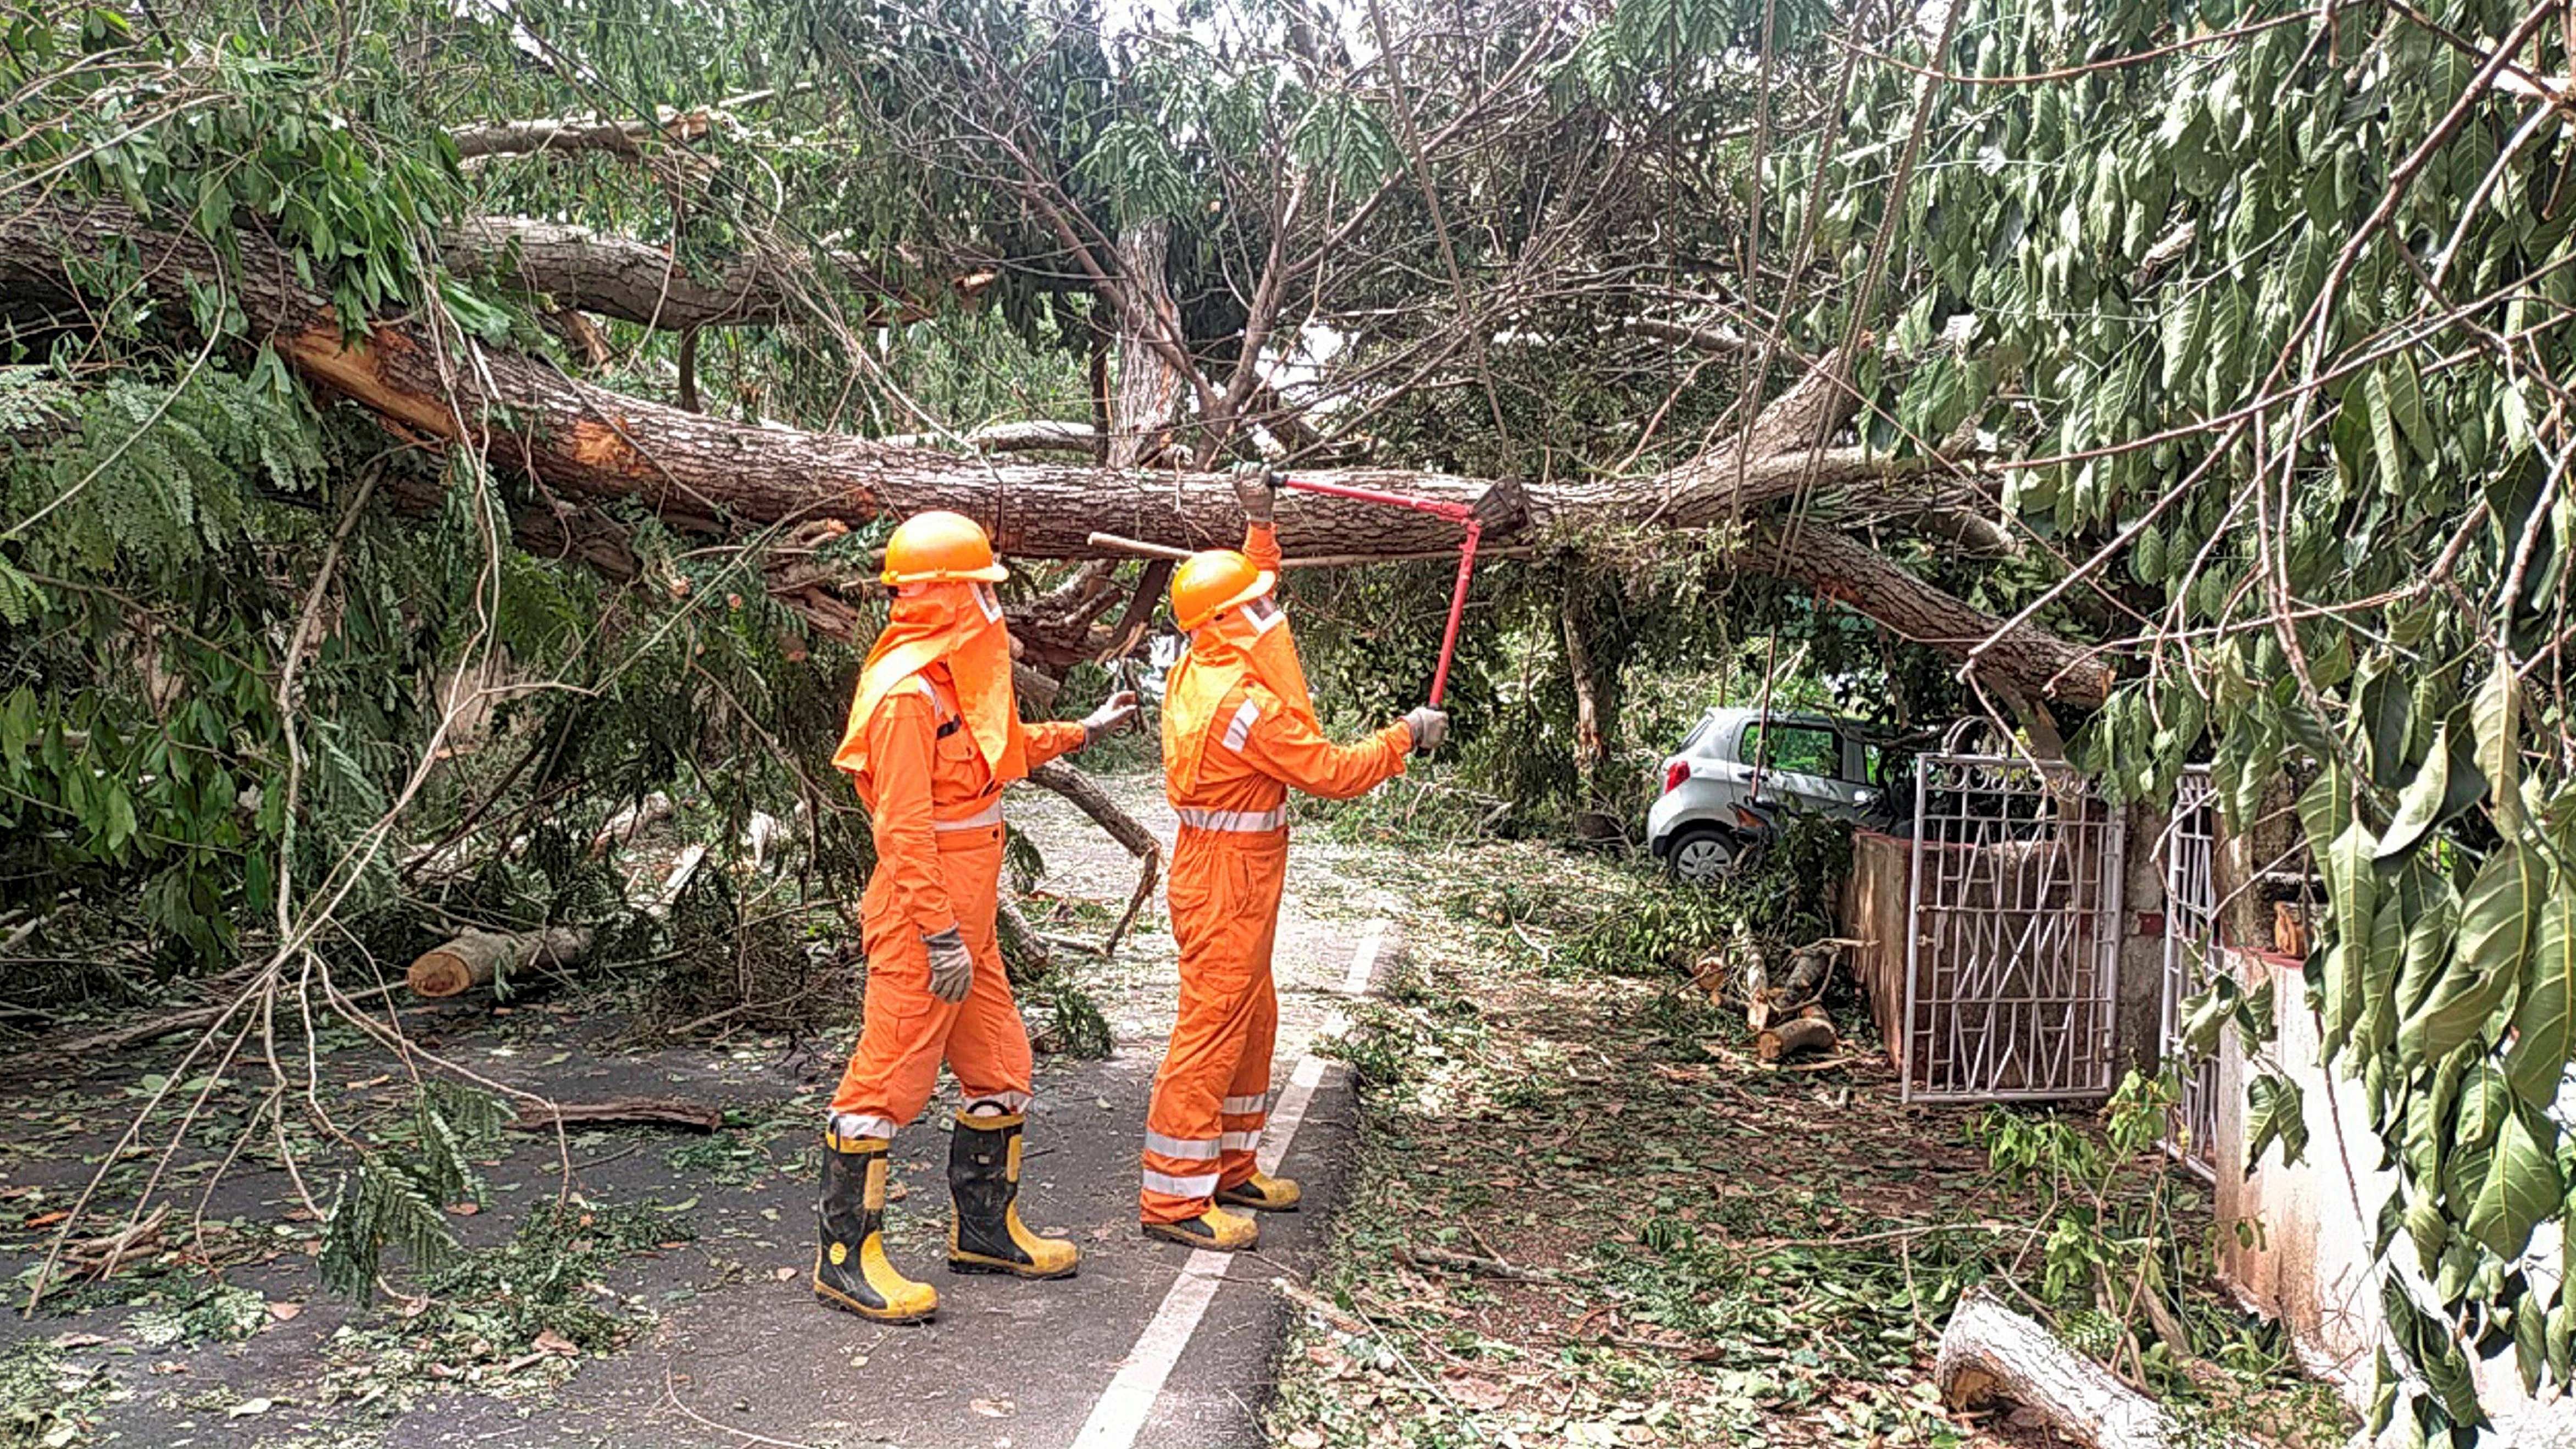 NDRF personnel carry out restoration works after tree fell on a road due to Cyclone Tauktae, in Goa, Monday. Credit: PTI Photo